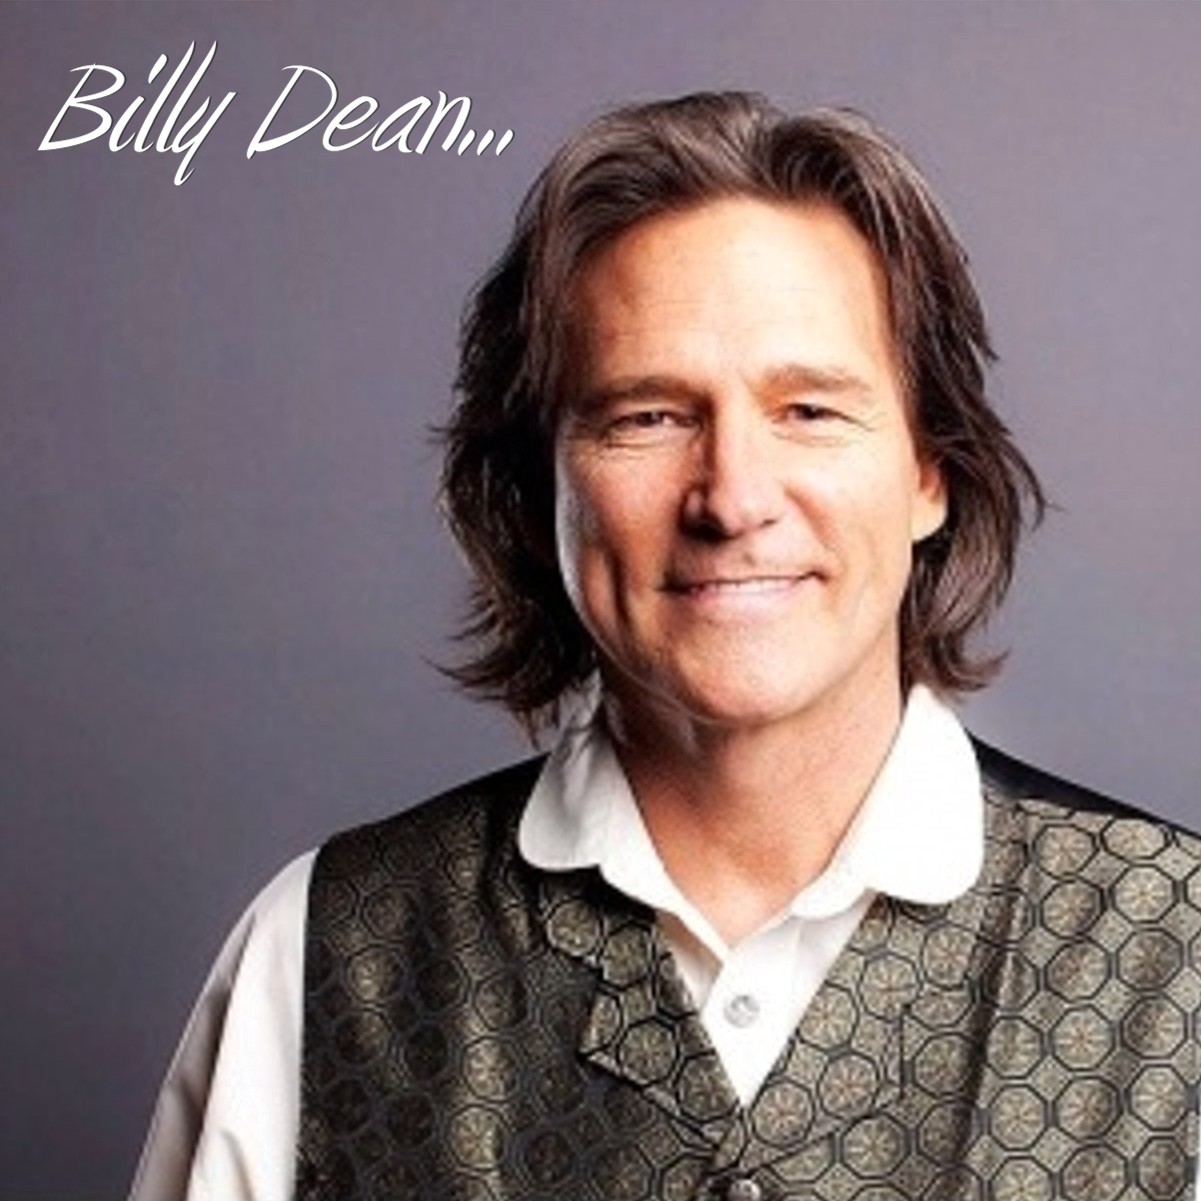 Strictly Country Magazine The Unappreciated Billy Dean